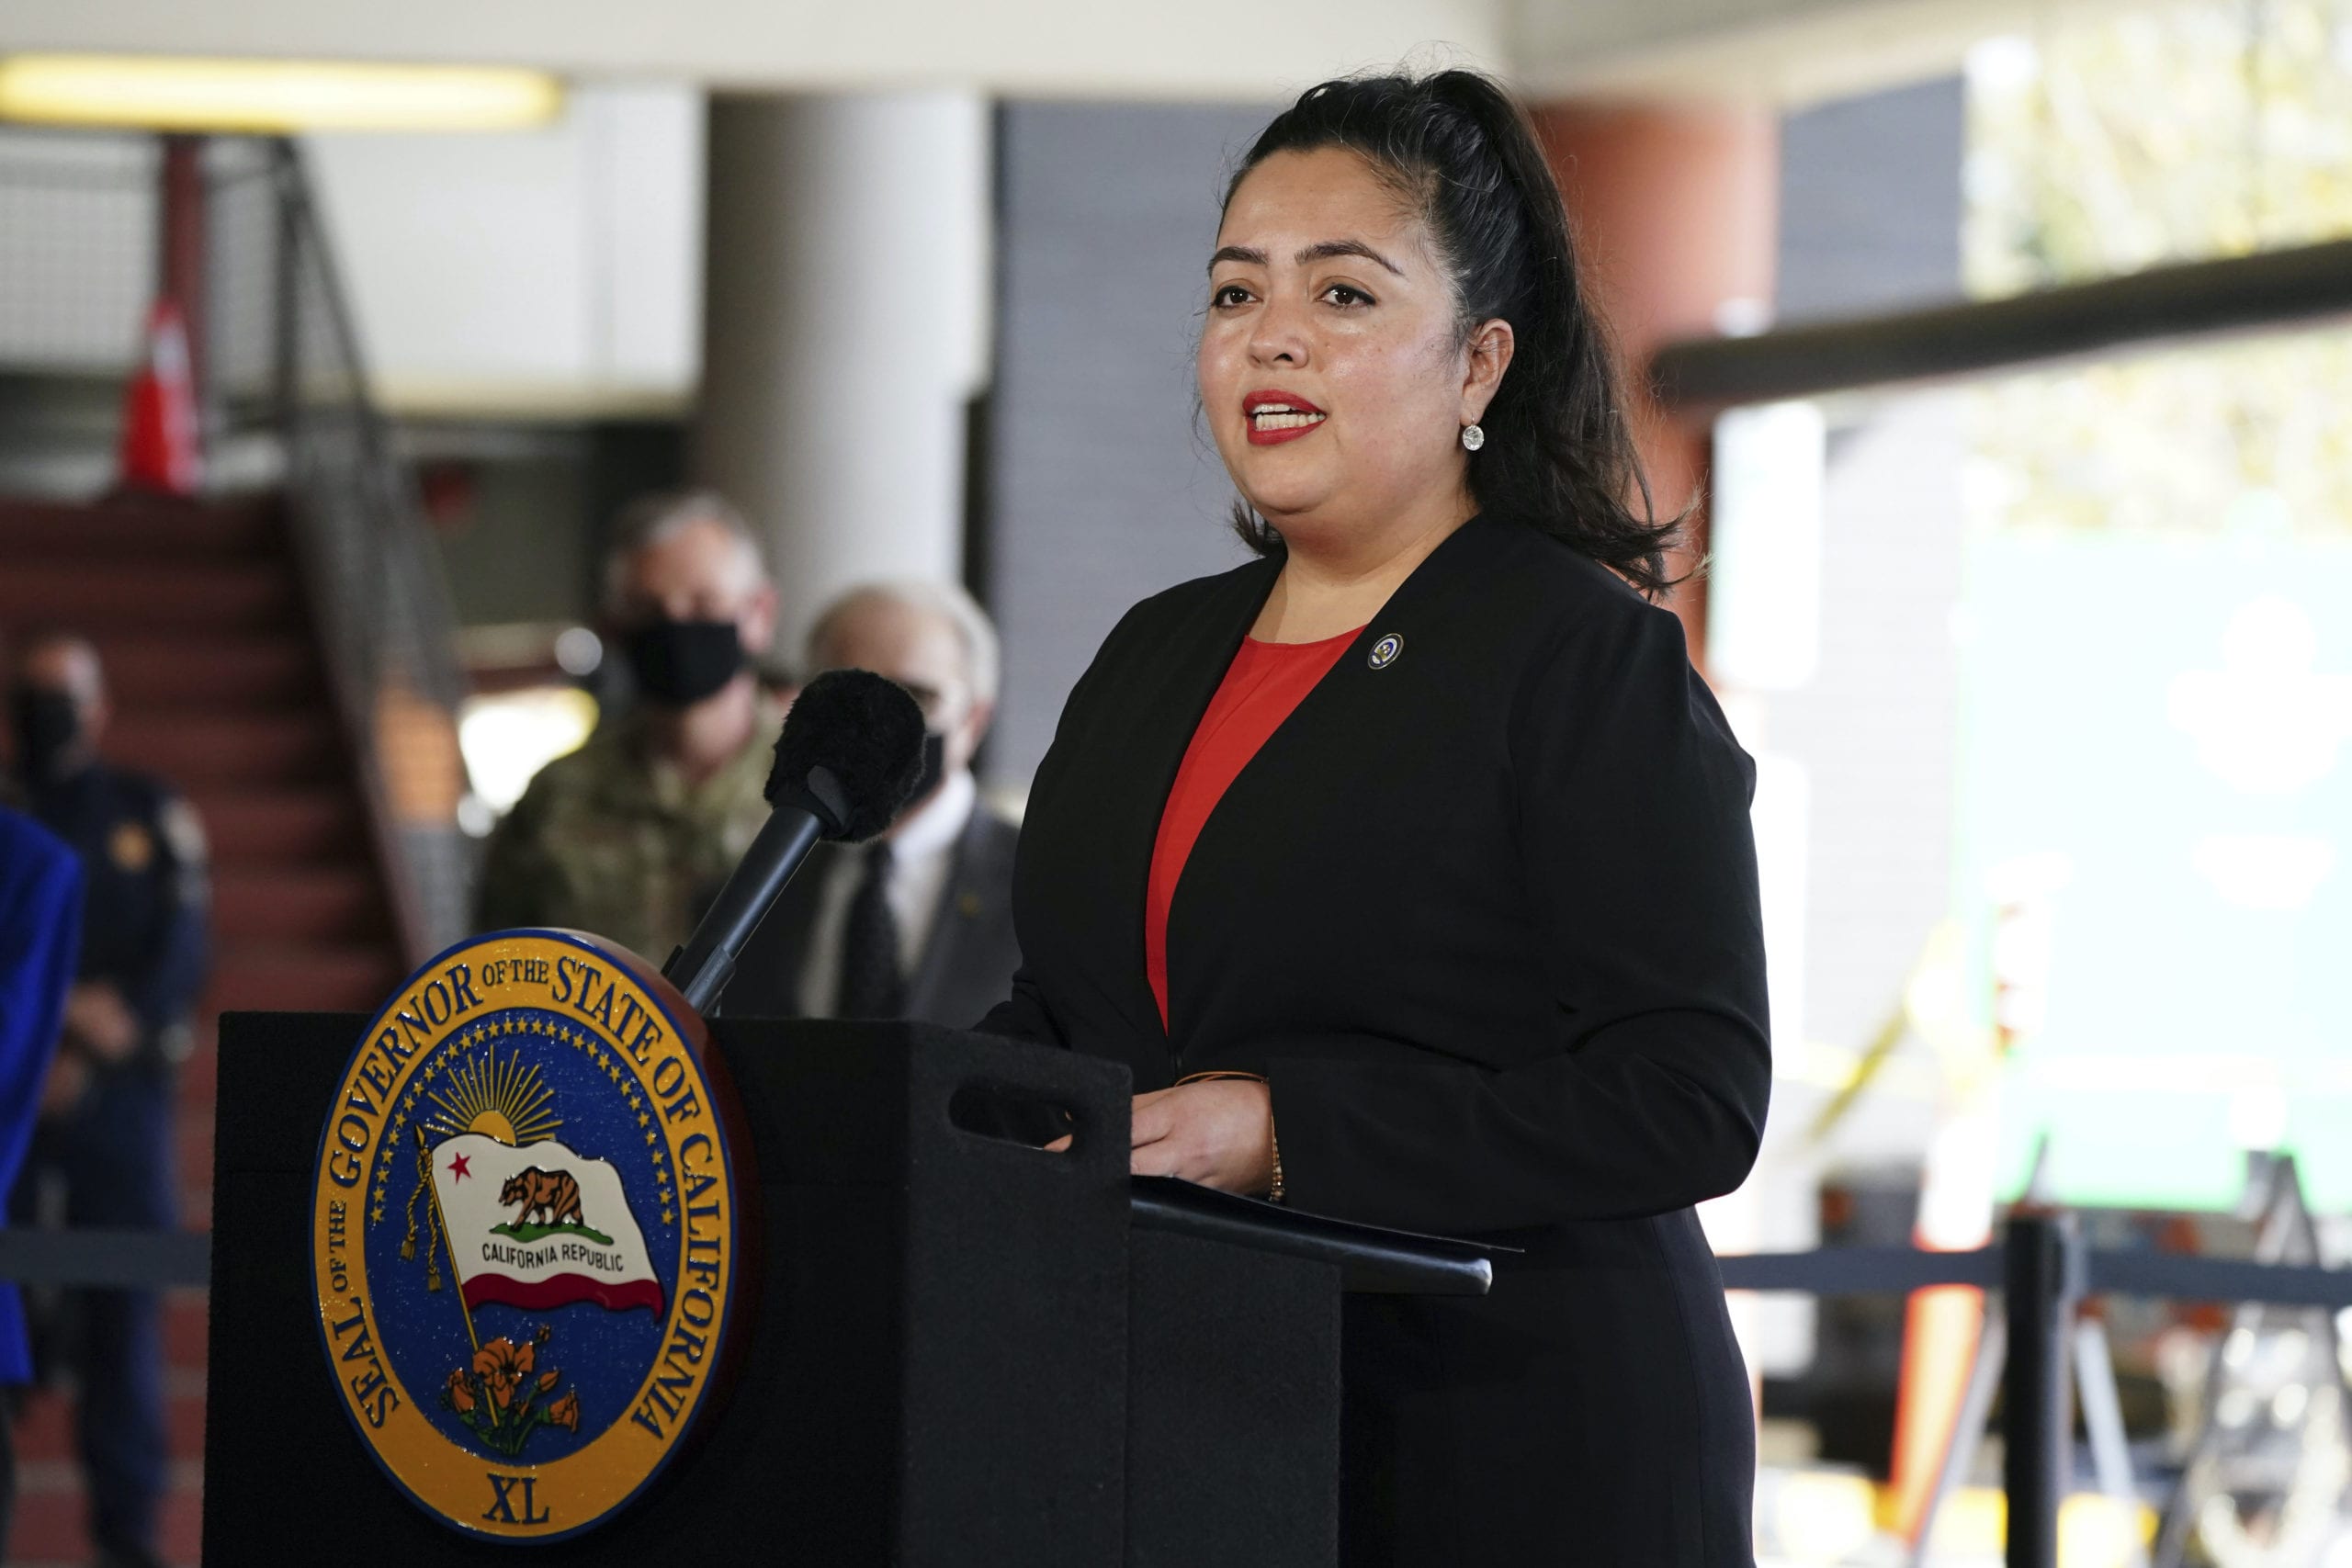 California Assemblywoman Wendy Carrillo (D-Los Angeles) stands at a podium in a red blouse and dark blazer speaking during a news conference at a joint state and federal COVID-19 vaccination site set up on the campus of Cal State LA.